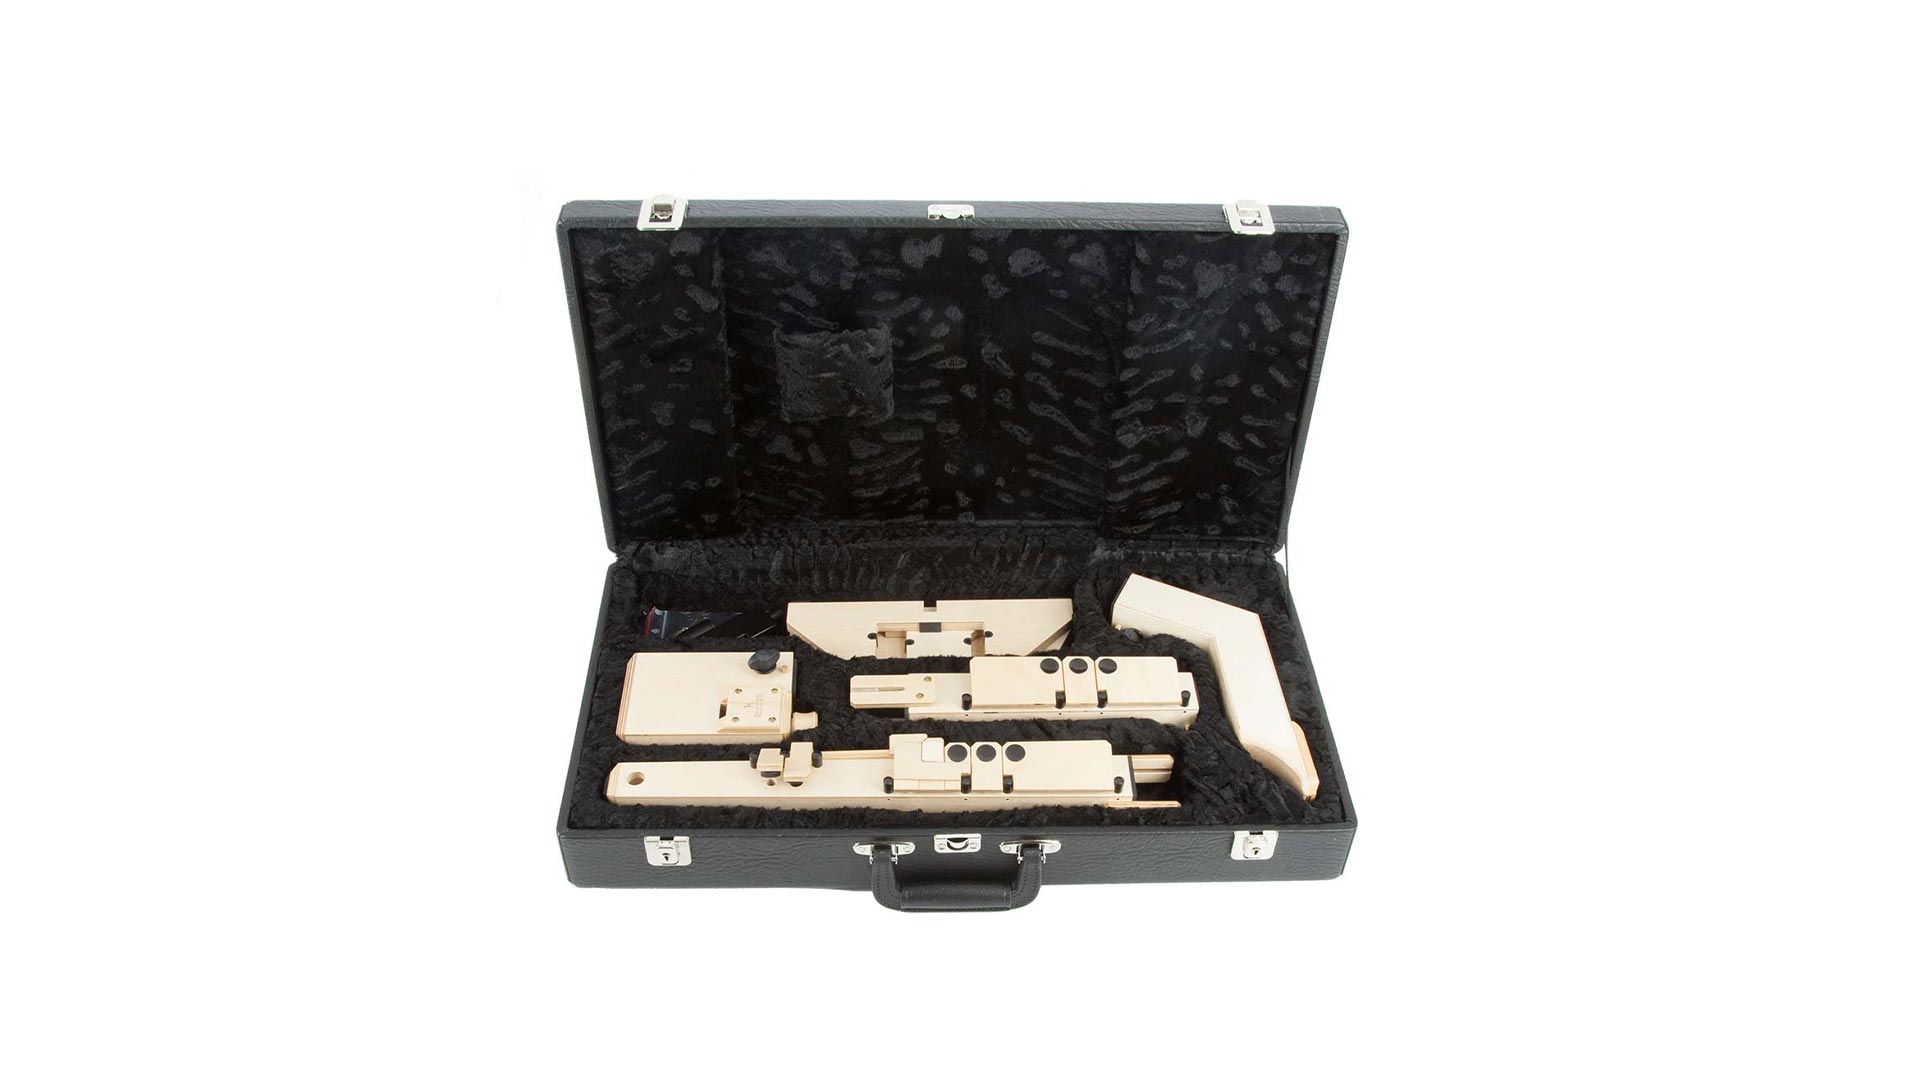 Paetzold by Kunath, case for basset recorder, 2 headjoints